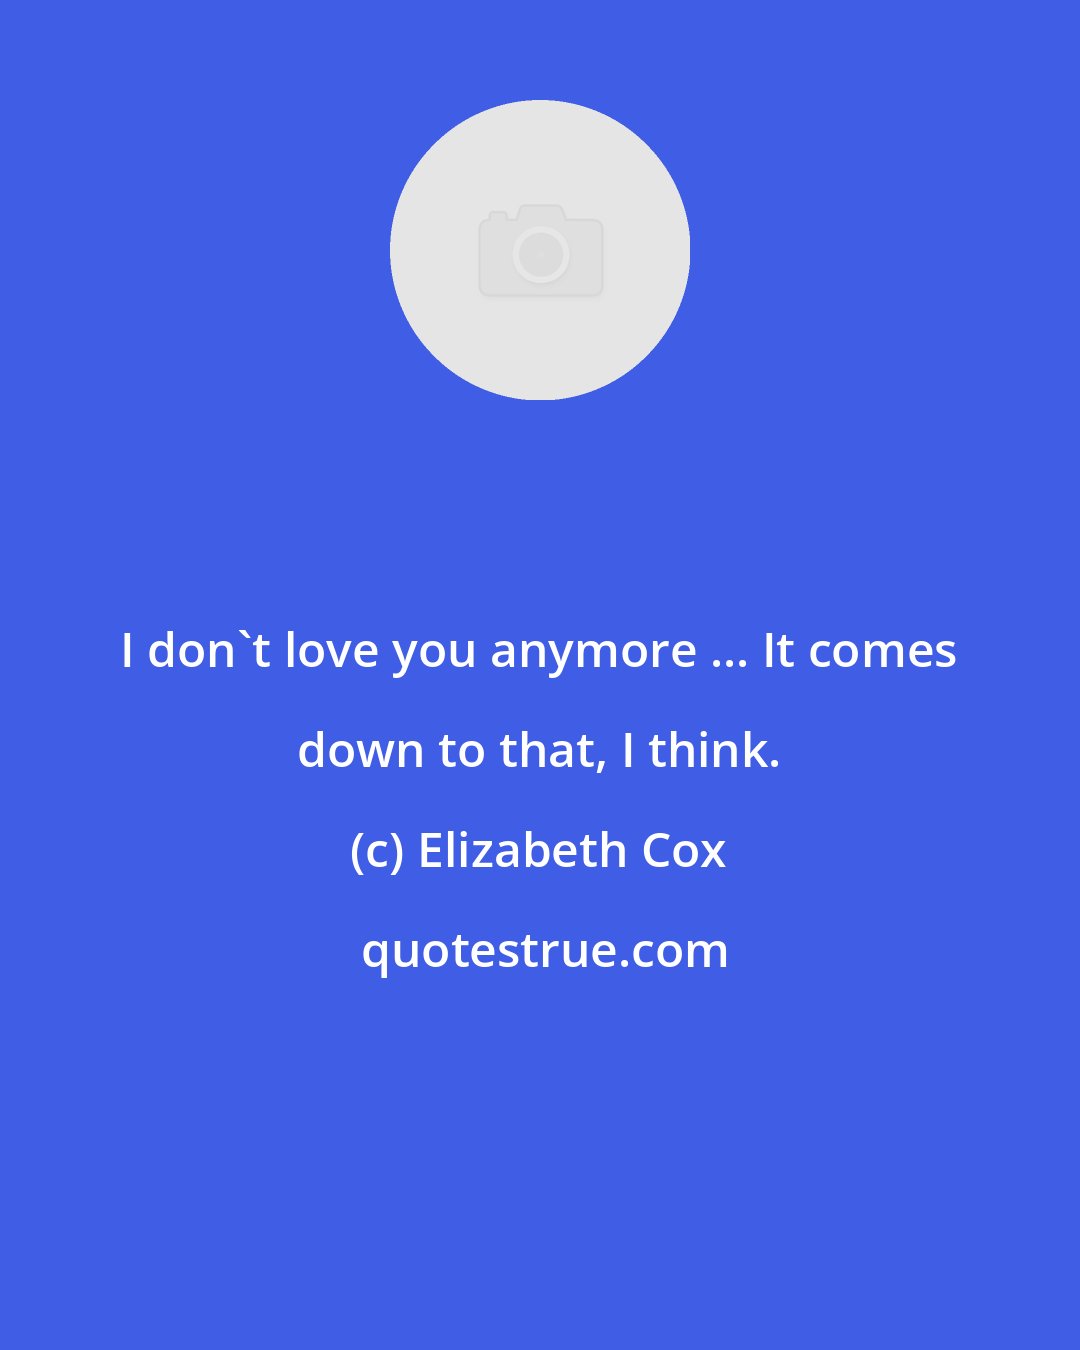 Elizabeth Cox: I don't love you anymore ... It comes down to that, I think.